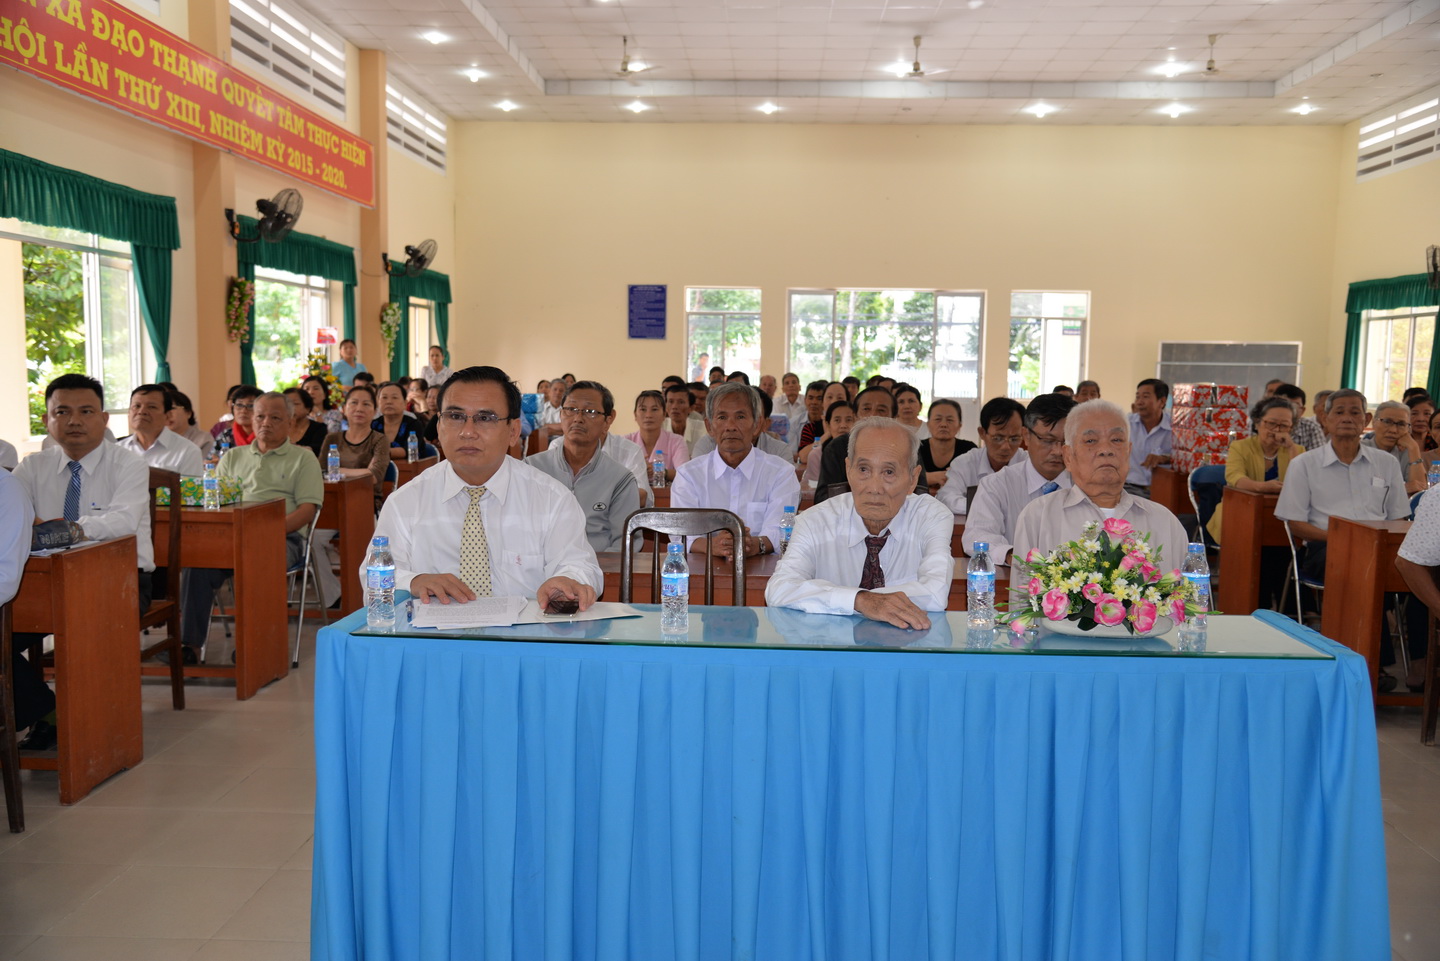  The view of the Party Badge awarding ceremony on September 2 in Dao Thanh Commune.